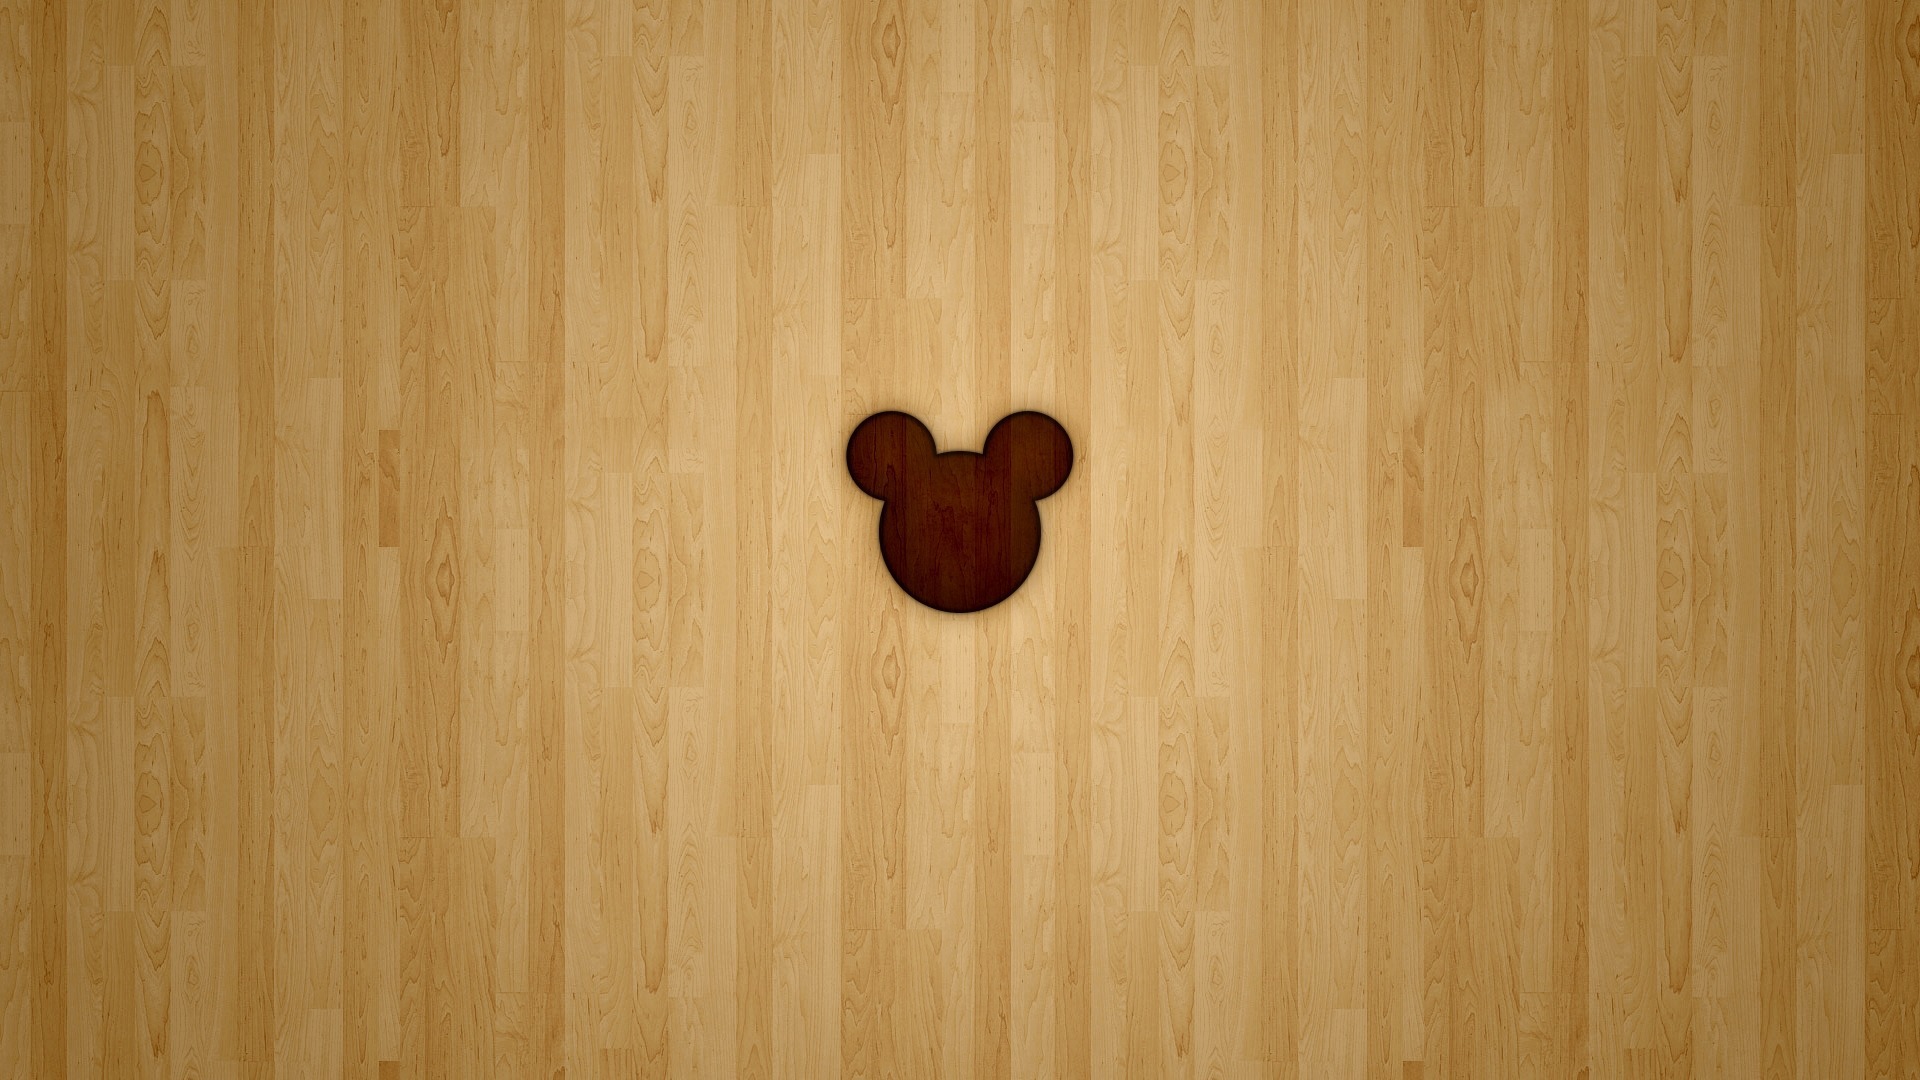 Mickey Mouse Silhouette Wallpapers